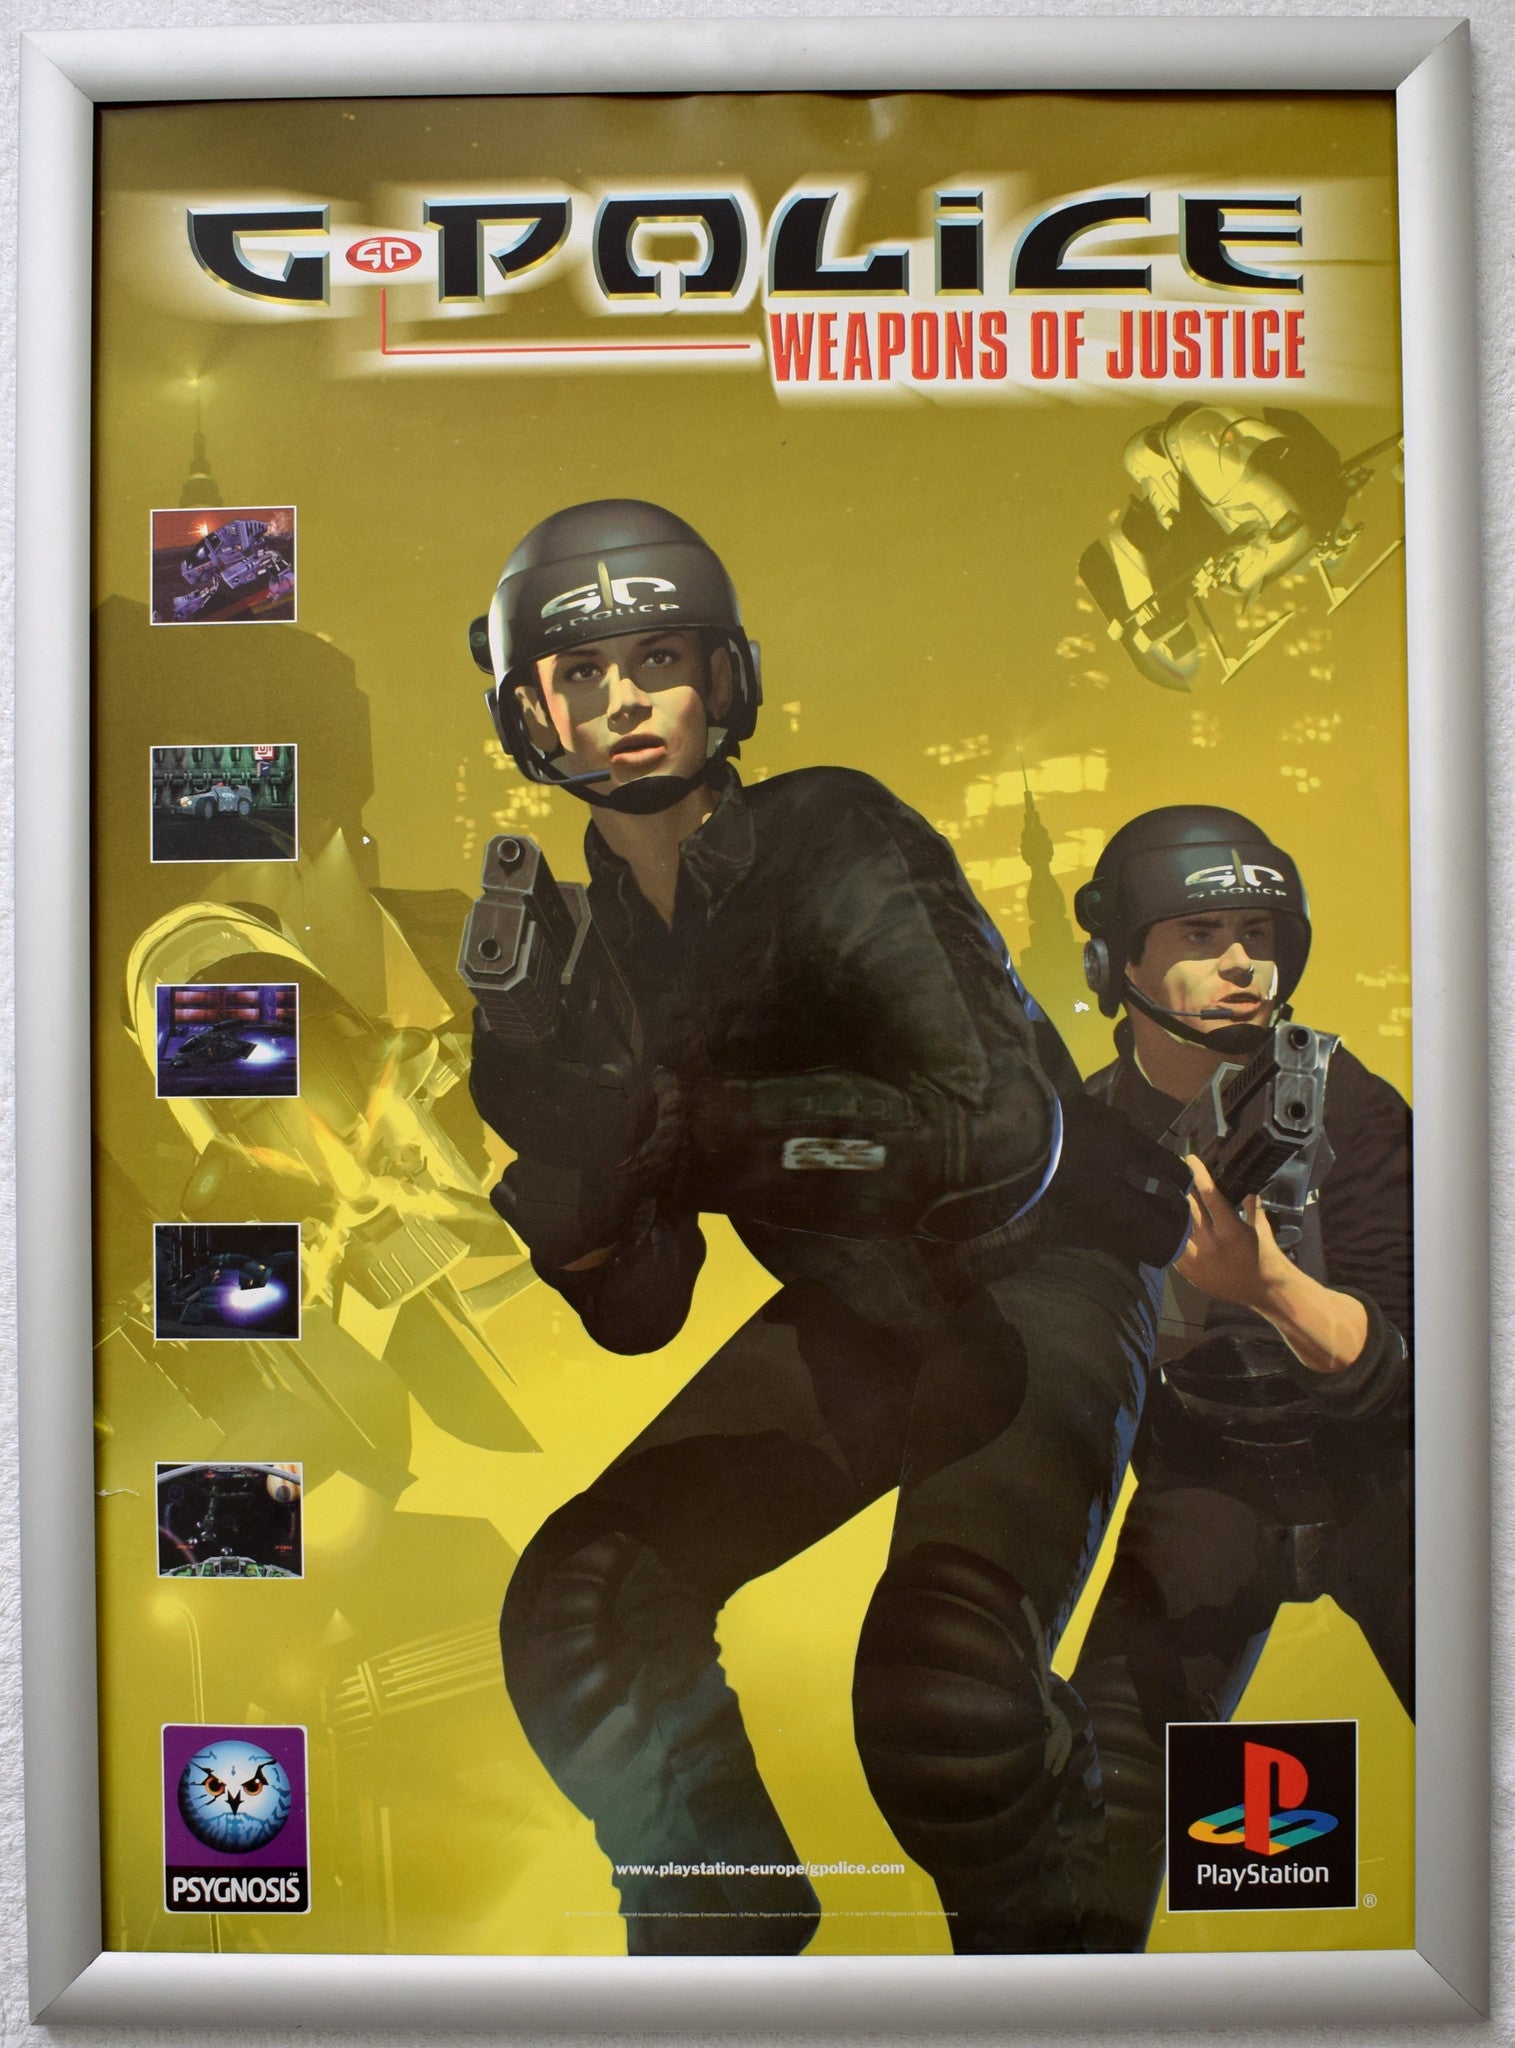 G Police Weapons of Justice (A2) Promotional Poster #2